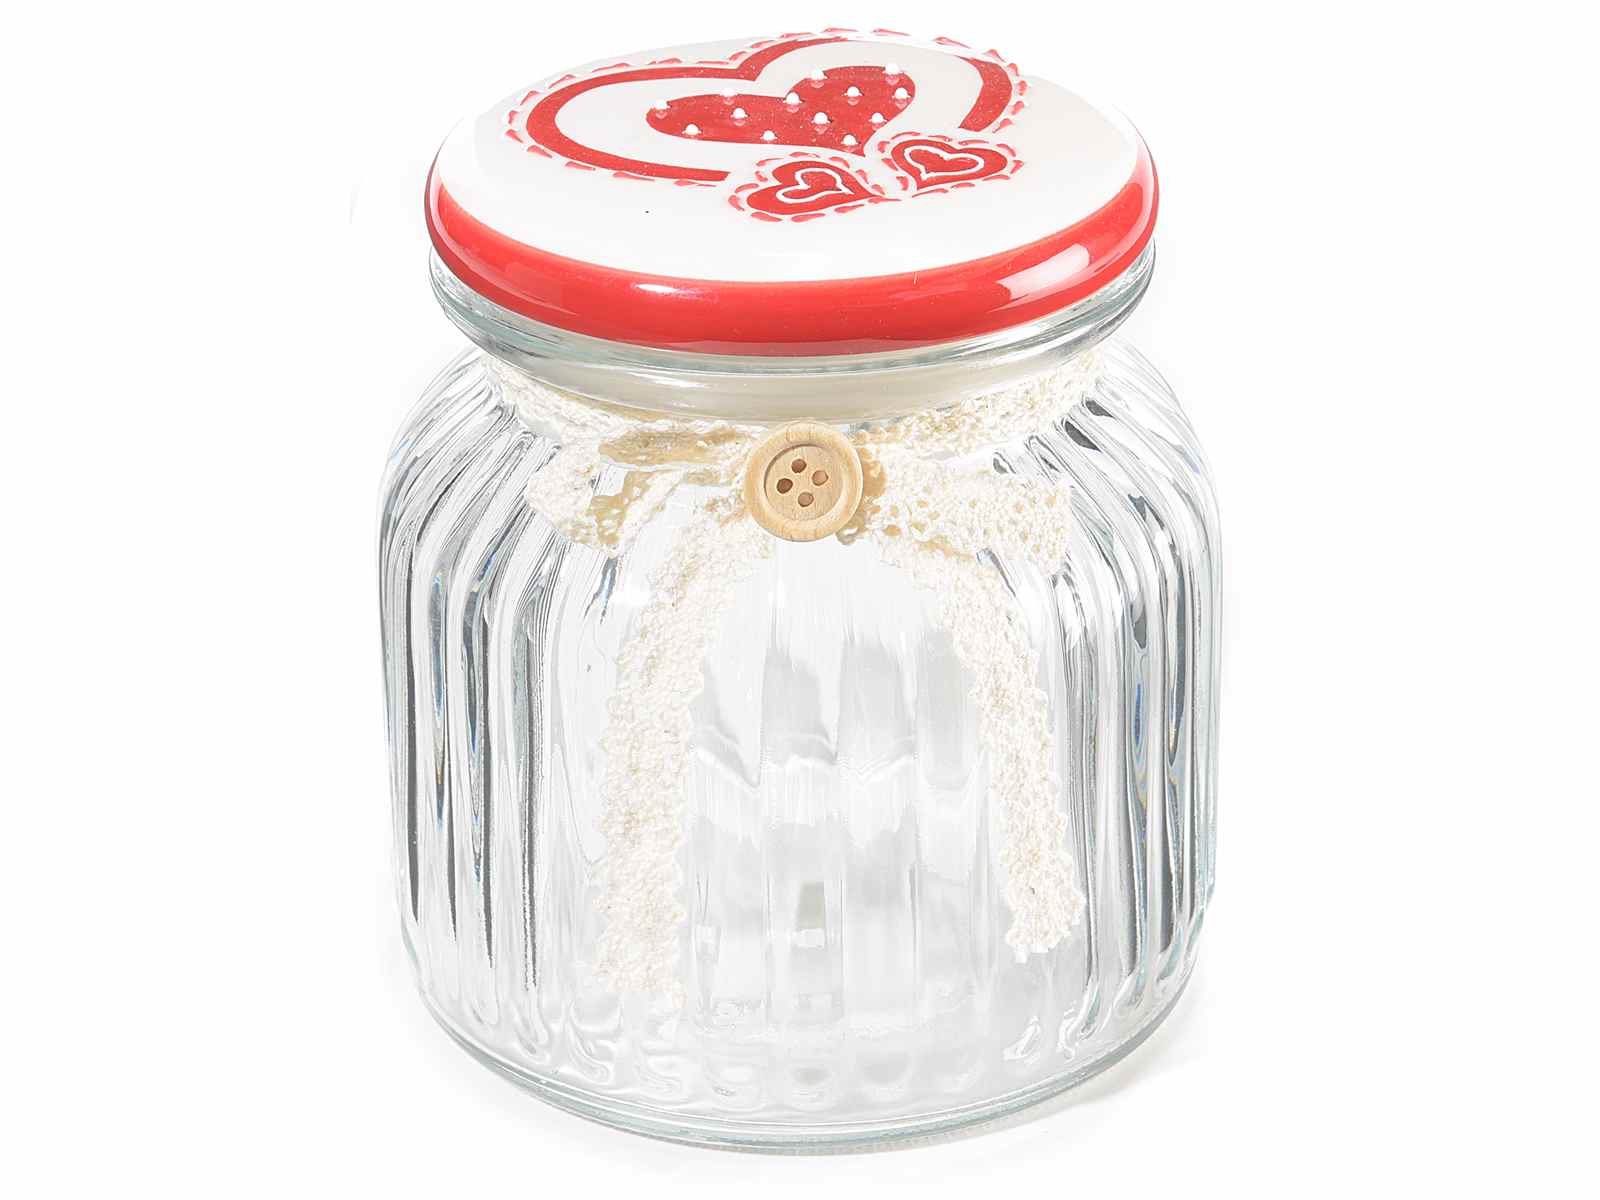 Glass Jars W Decorated Ceramic Lid And Lace Bow 80 14 44